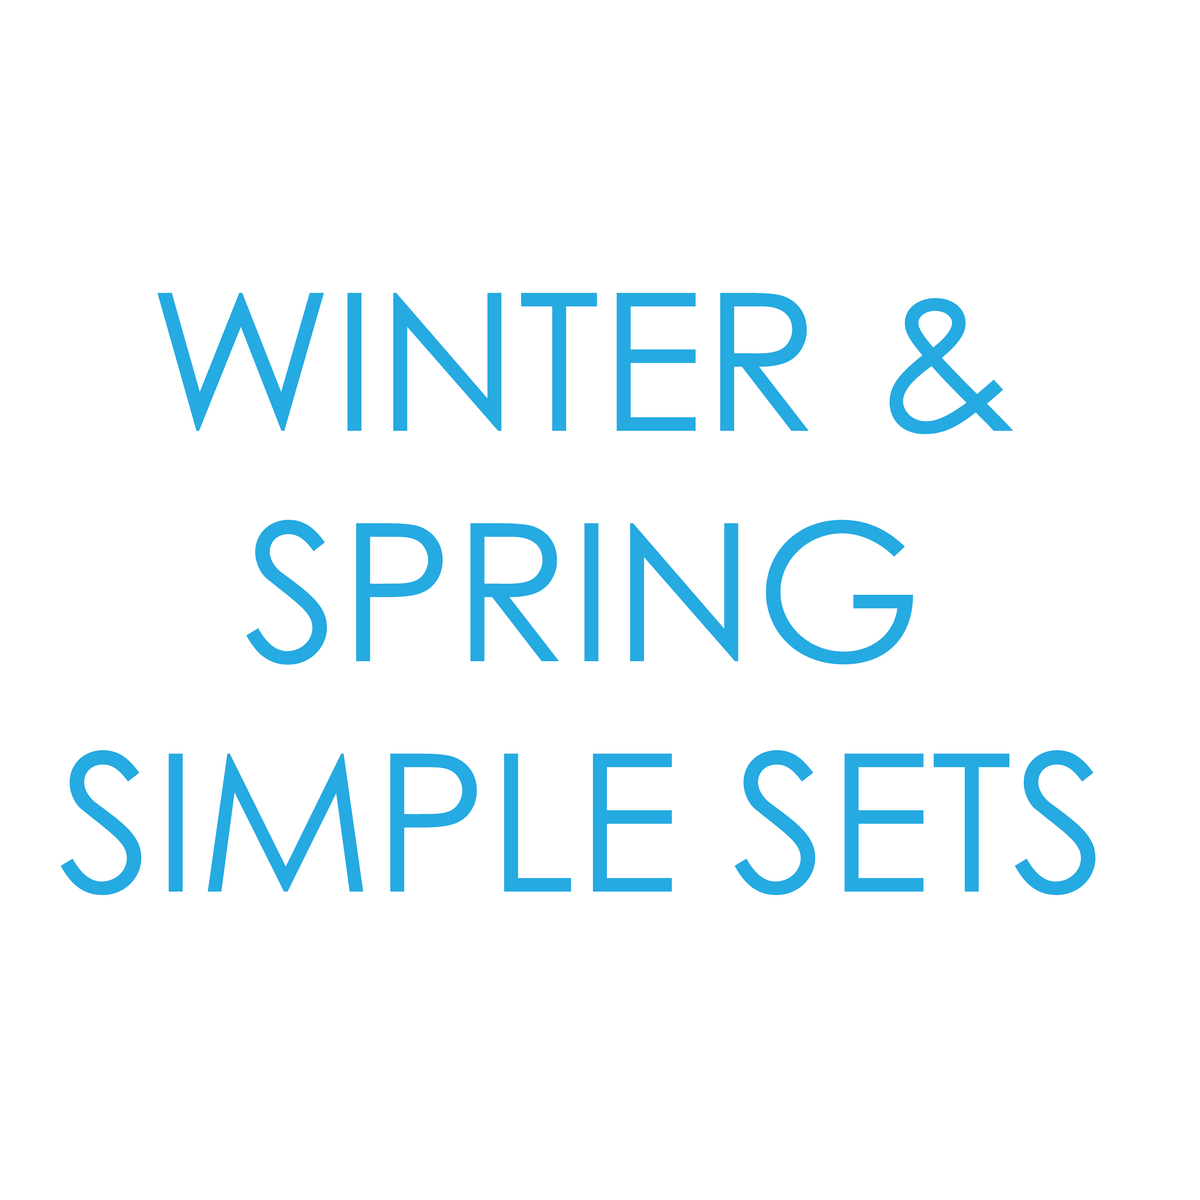 WINTER & SPRING SIMPLE SETS